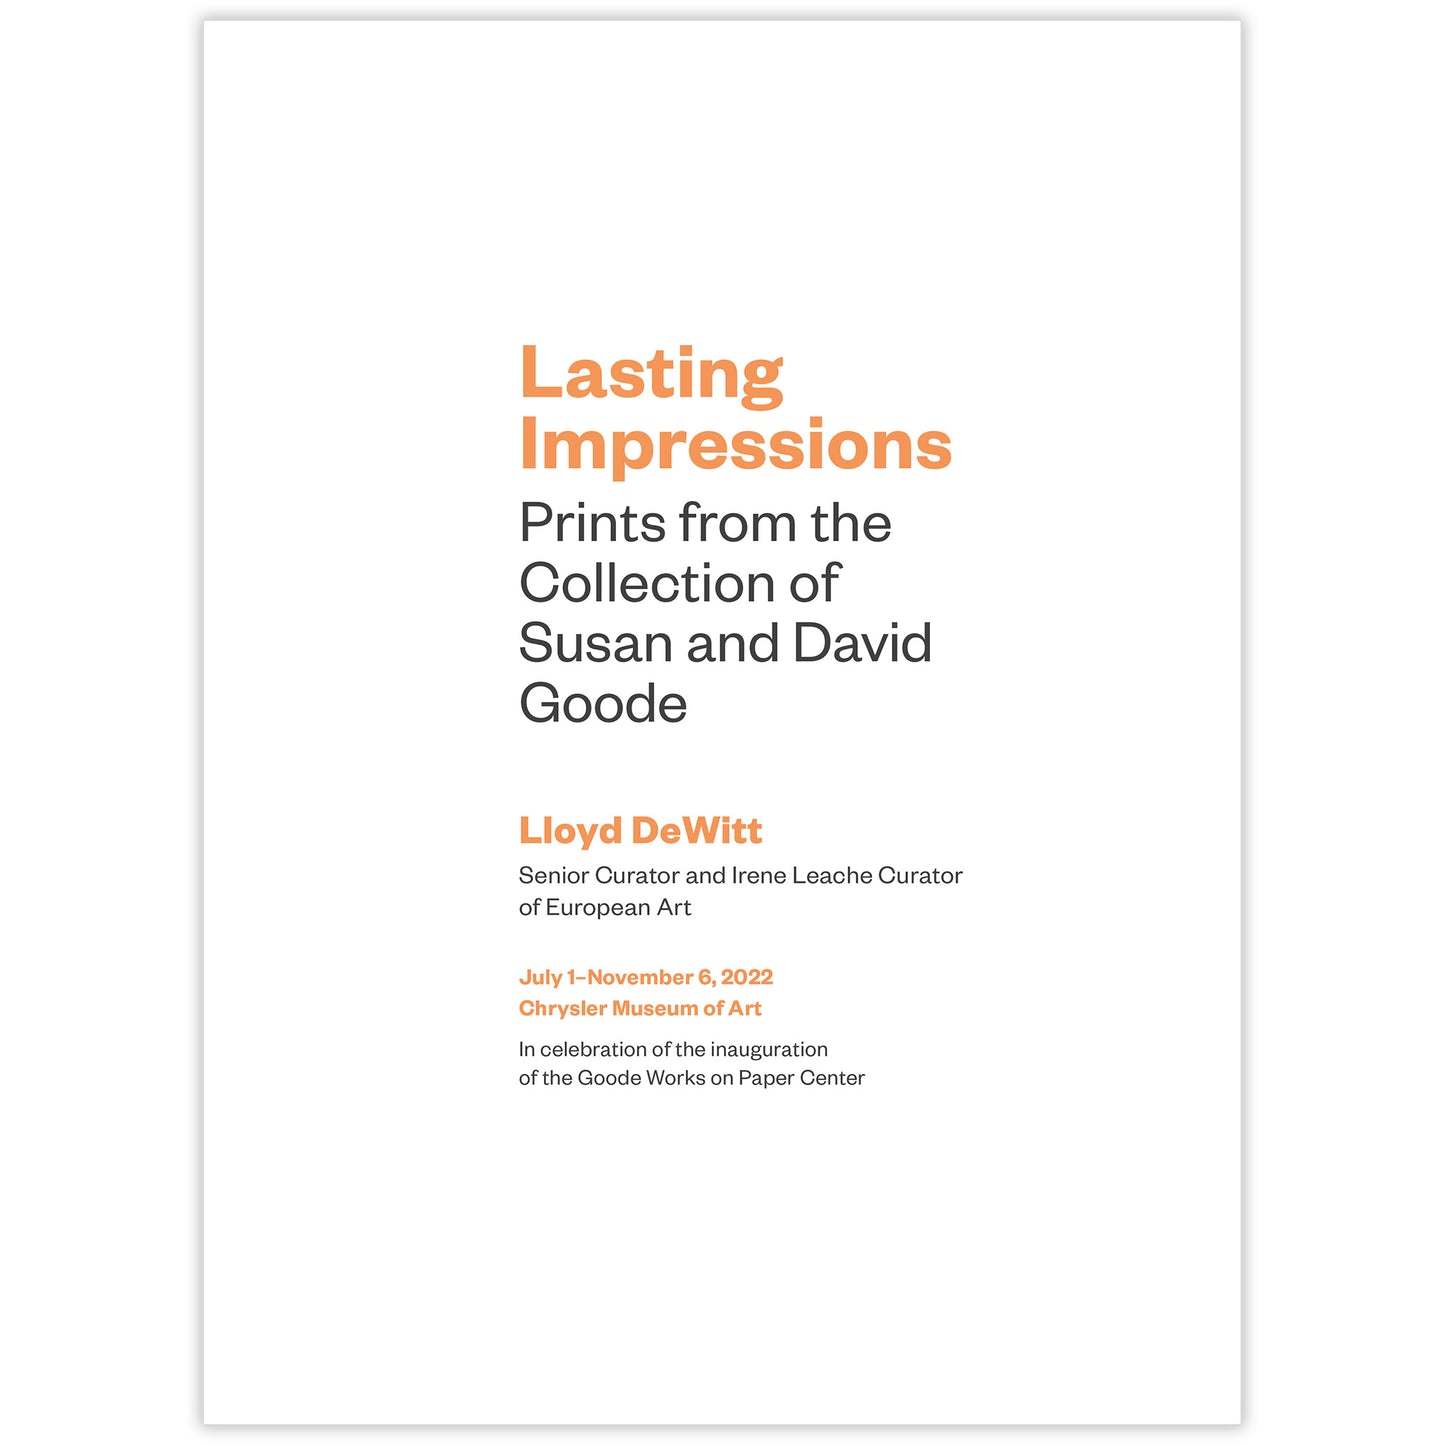 Lasting Impressions: Prints from the Collection of Susan and David Goode